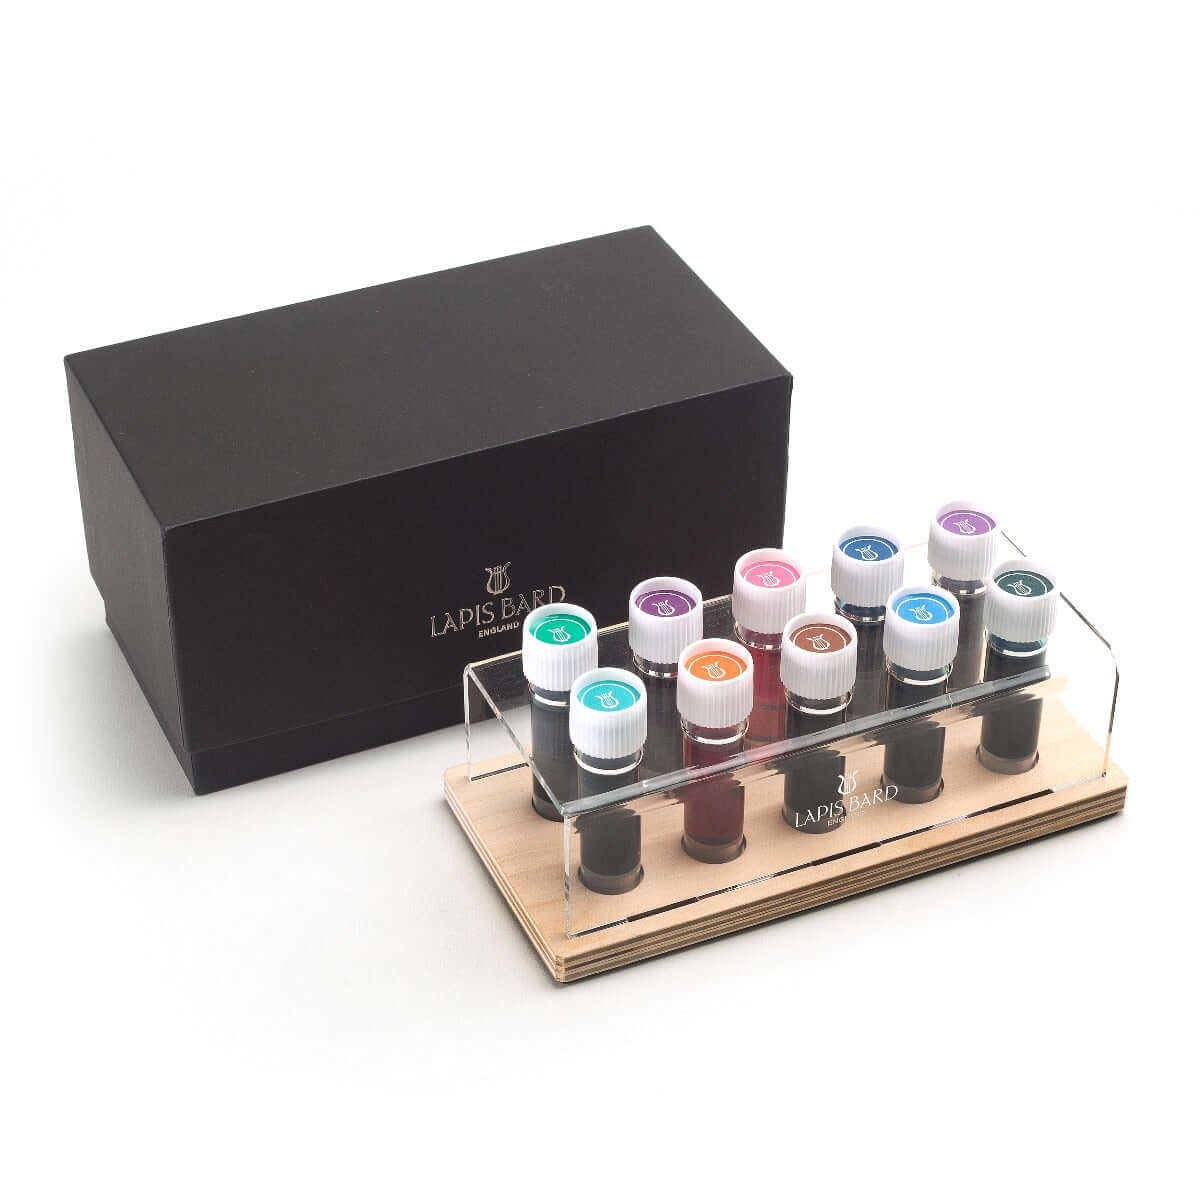 Lapis Bard Fountain Pen Ink Vial Set Of 10 Colors Assorted - 5ml Each 1